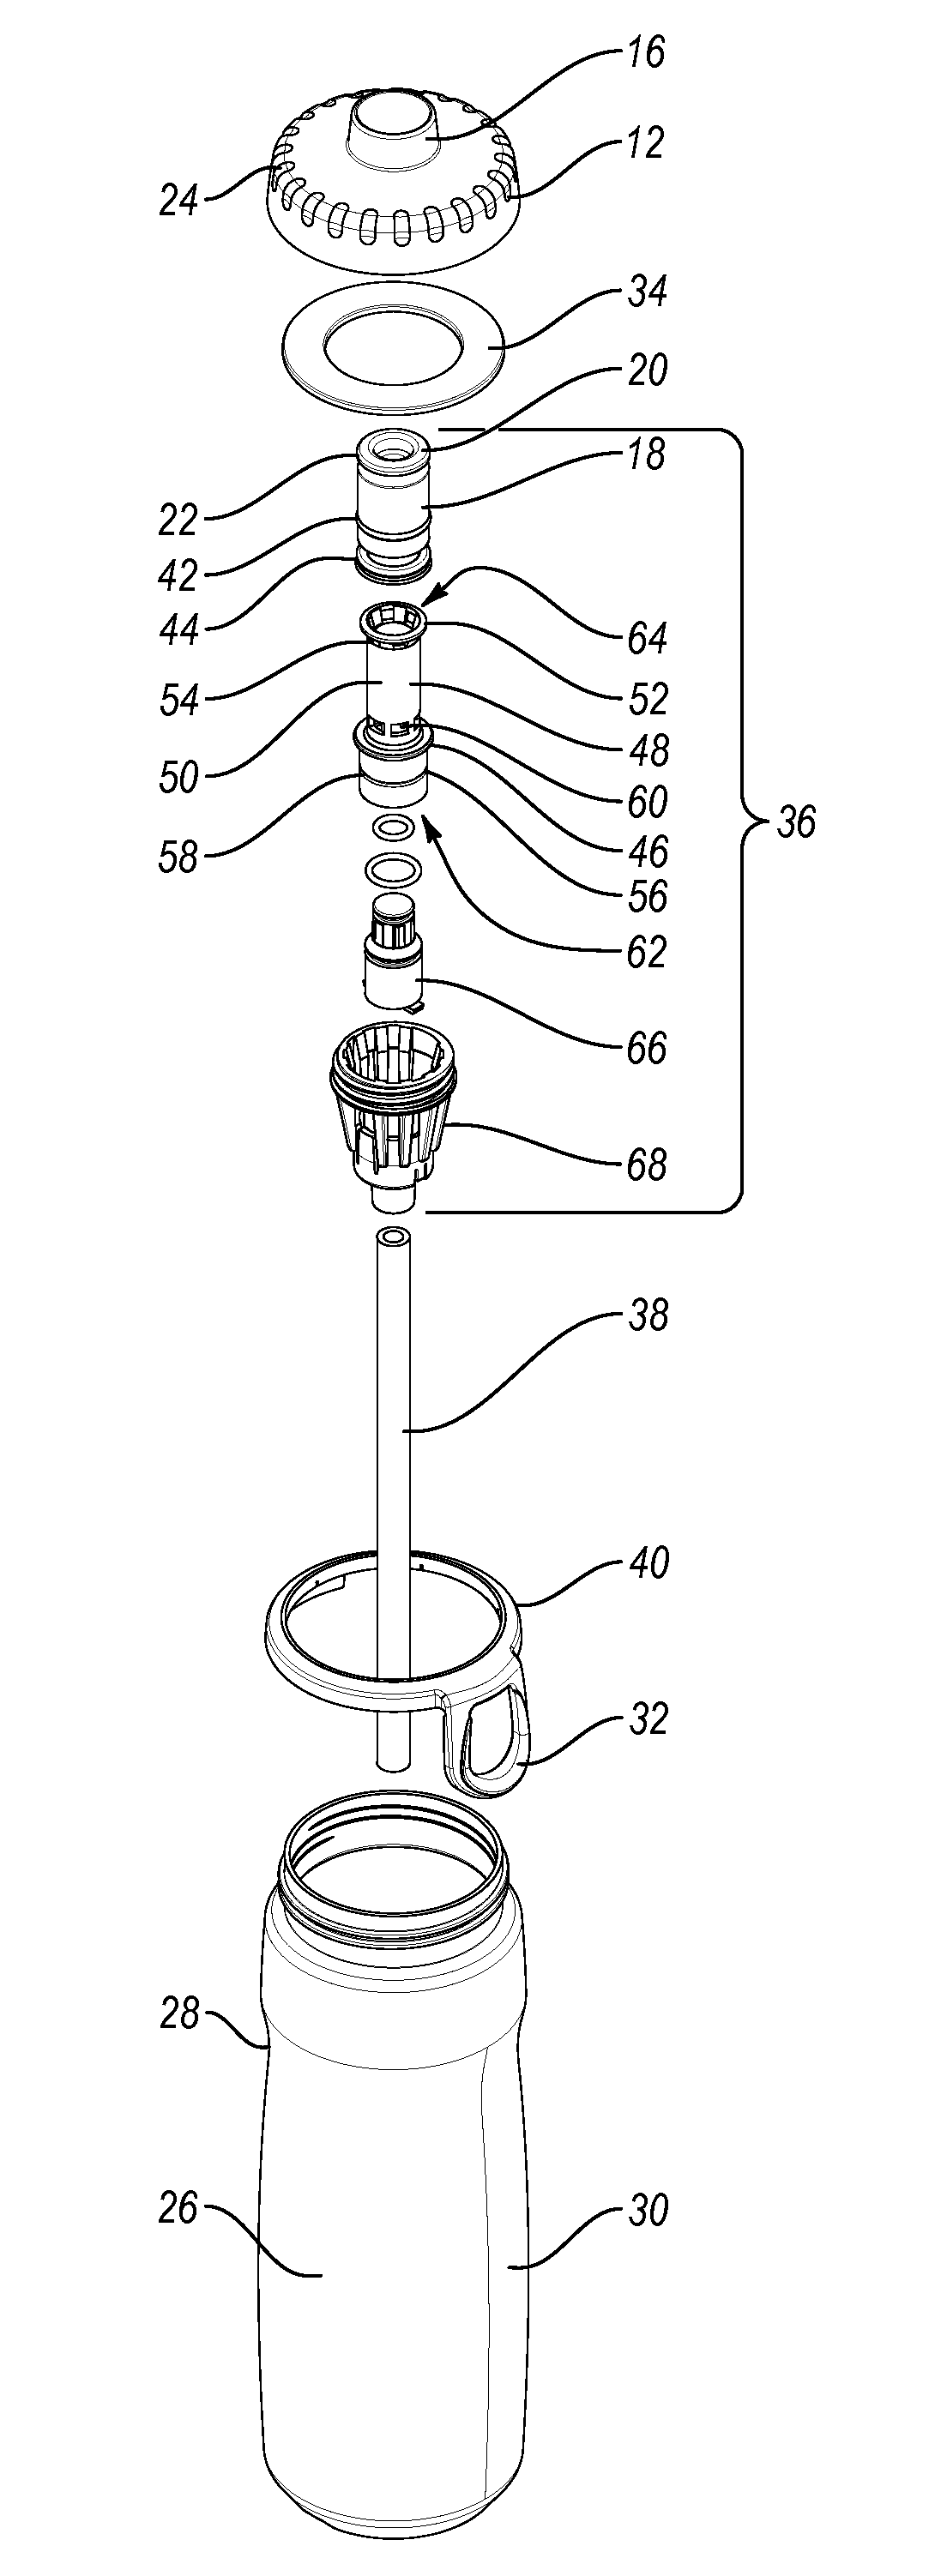 Liquid dispensing container with multi-position valve and straw